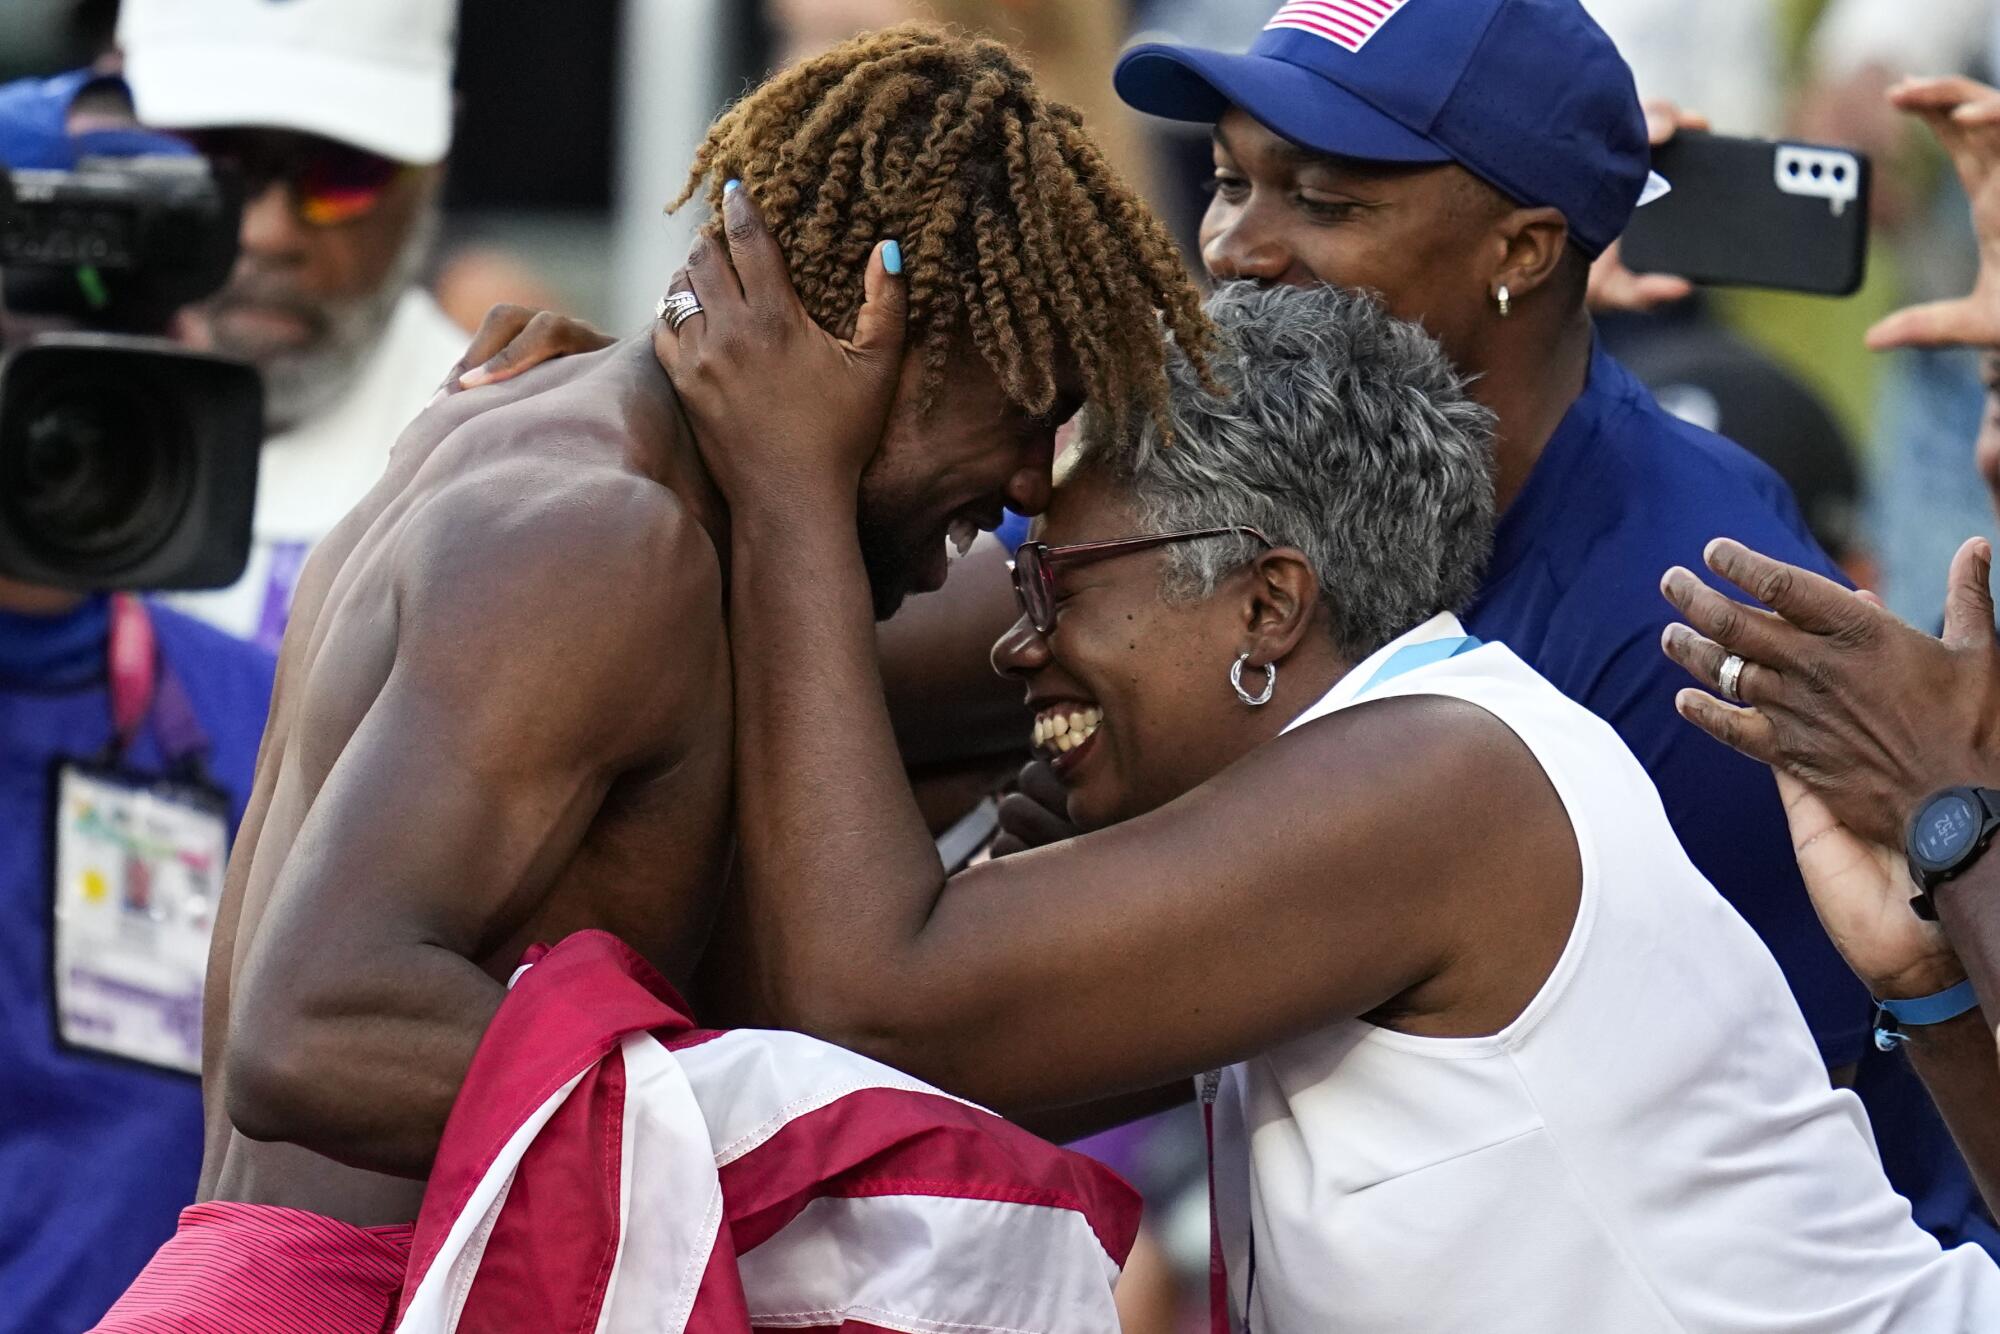 American sprinter Noah Lyles greets family after winning the 200-meter race at the world championships.